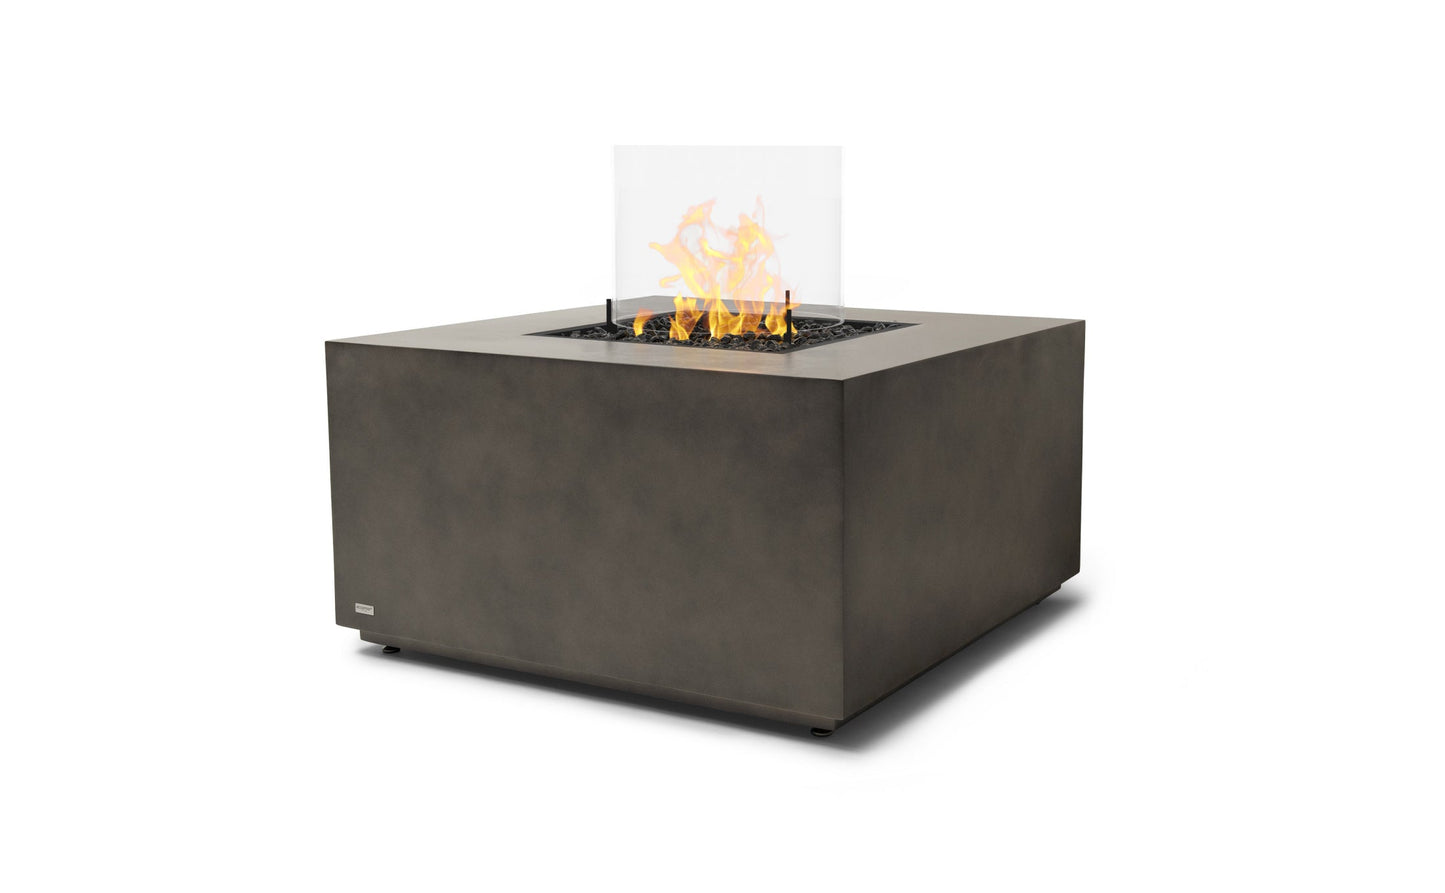 EcoSmart Fire CHASER 38" Natural Outdoor Fire Pit Table with Gas LP/NG Burner by Mad Design Group